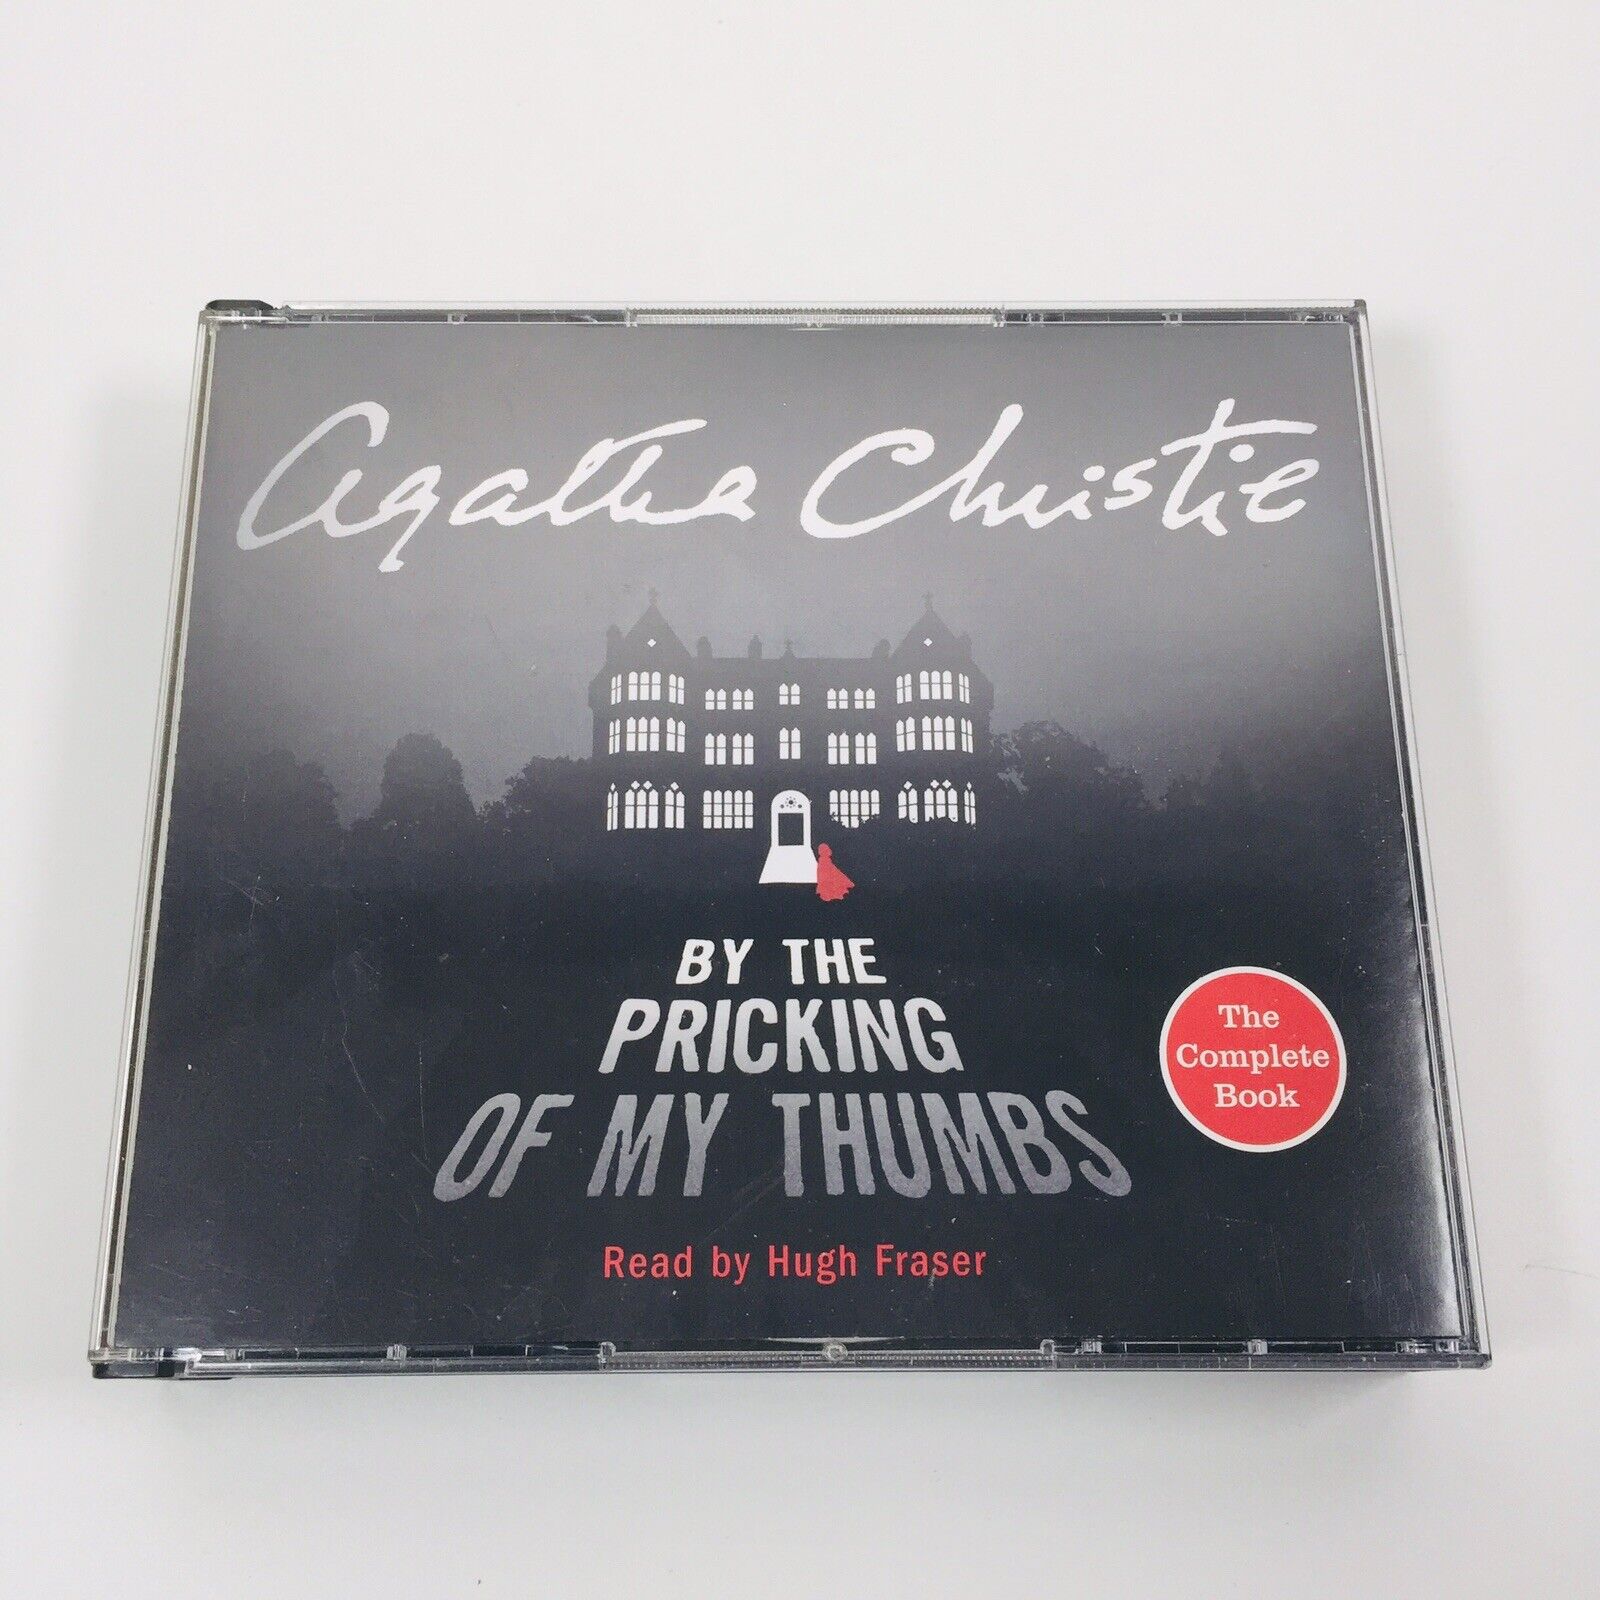 By the Pricking of my Thumbs by Agatha Christie (Audio CD 2008)